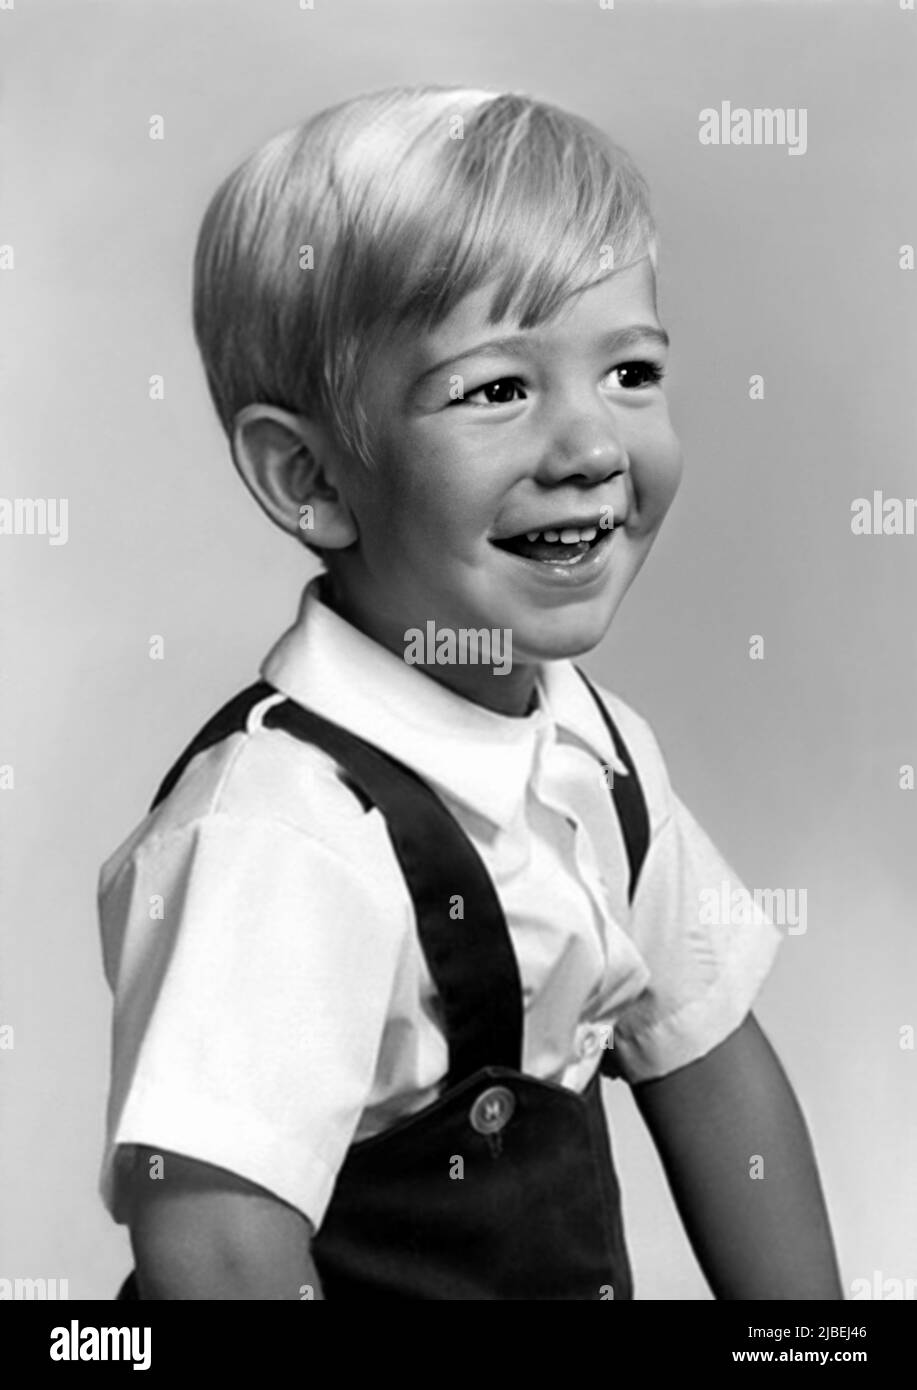 1967 ca, USA : The celebrated american rich JEFF BEZOS ( Preston Jorgensen - born 12 january 1964 ) when was a young boy aged 3 . American entrepreneur, media proprietor , investor , computer engineer , and commercial astronaut . He is the founder,  executive chairman and former president and CEO of AMAZON .  Unknown photographer .- INFORMATICA - INFORMATICO - INFORMATICS - COMPUTER TECHNOLOGY  - HISTORY - FOTO STORICHE - TYCOON - personalità  da bambino bambini da giovane - personality personalities when was young - INFANZIA - CHILDHOOD - BAMBINO - BAMBINI - CHILDREN - CHILD - RICCO - RICH - Stock Photo